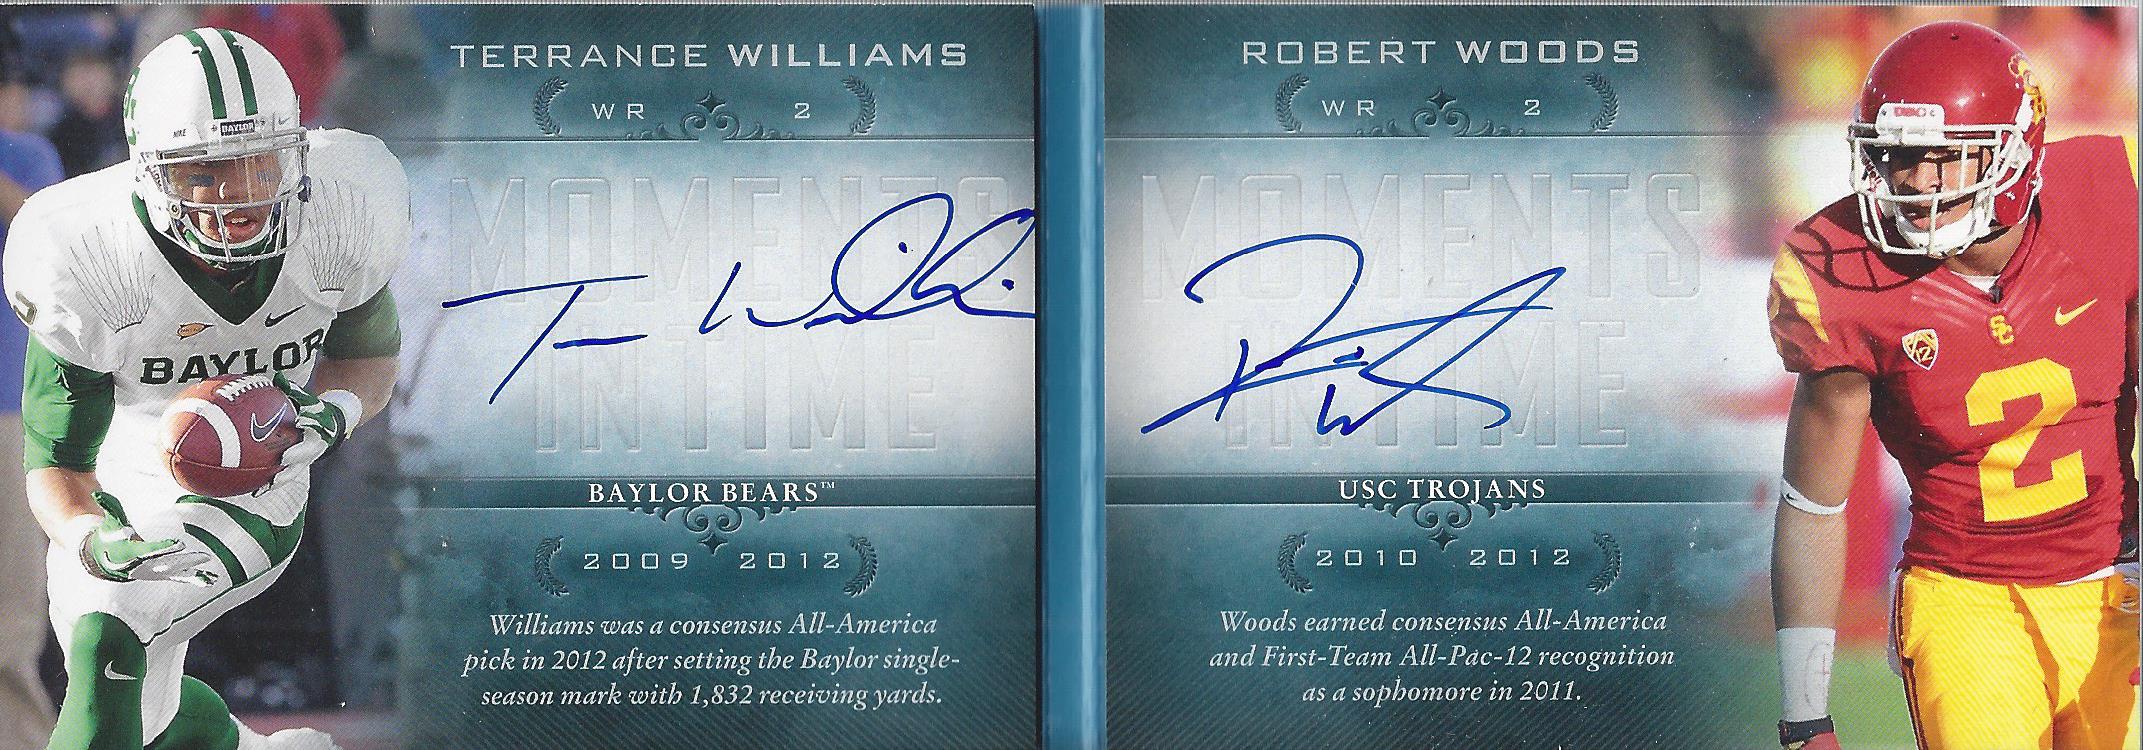 2013 Upper Deck Quantum Moments in Time Dual Autographs #MTRWW Terrance Williams/Robert Woods/75